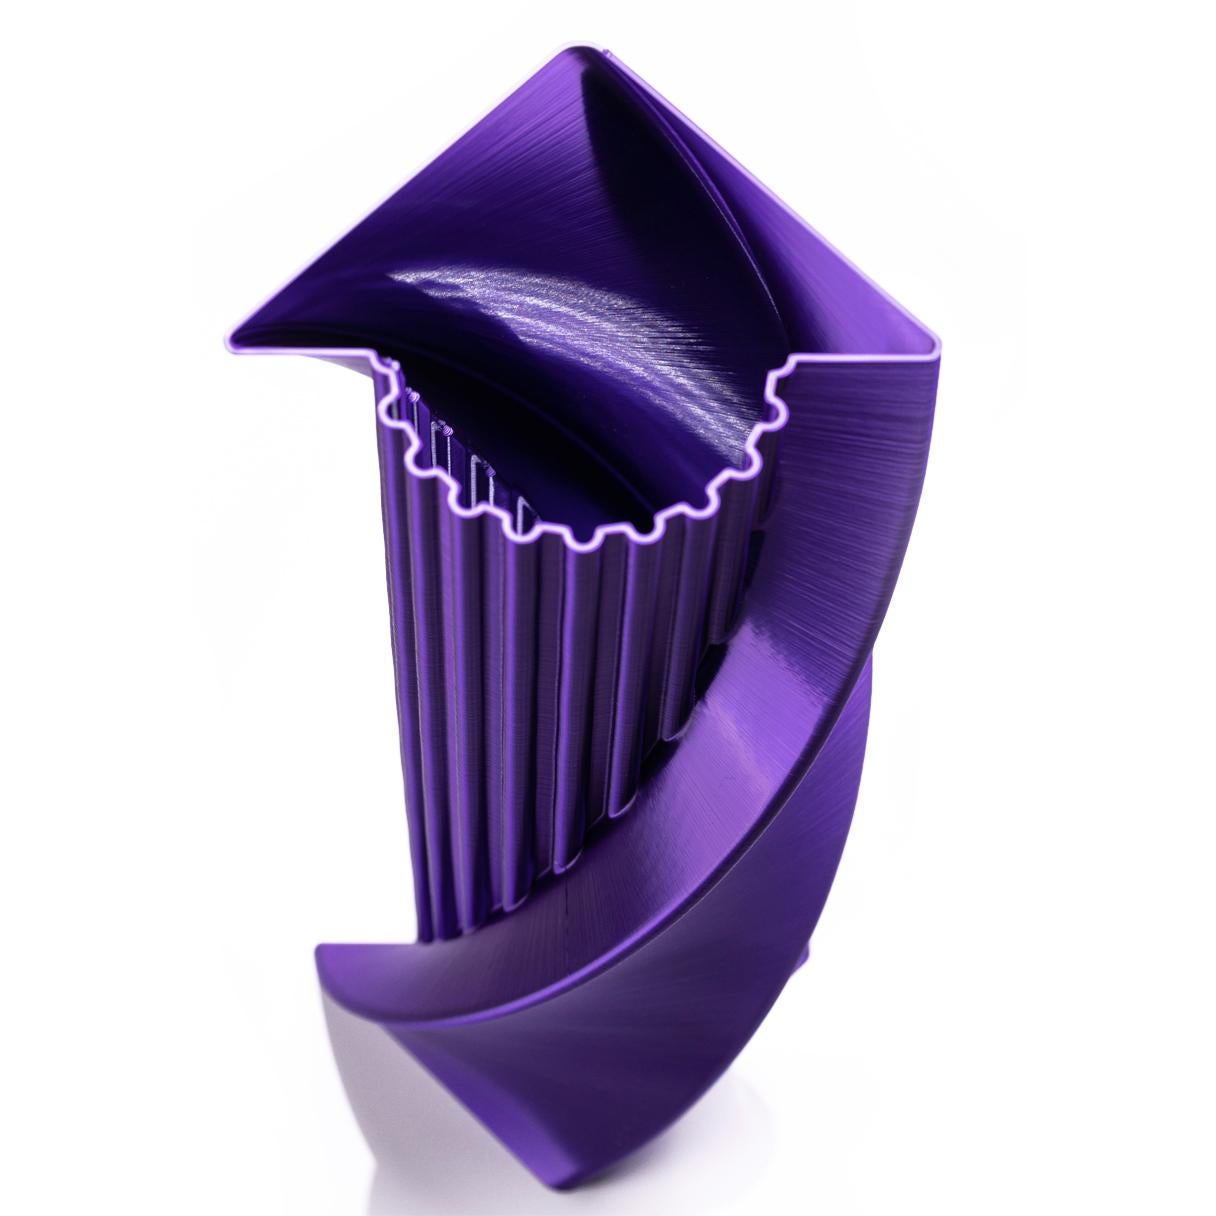 Vase-sculpture by DygoDesign

Sculpture inspired by the most famous classical forms, it transposes a millenary tradition in a modern key.

The characteristic profile refers to the dating back to classical architecture and in particular to the